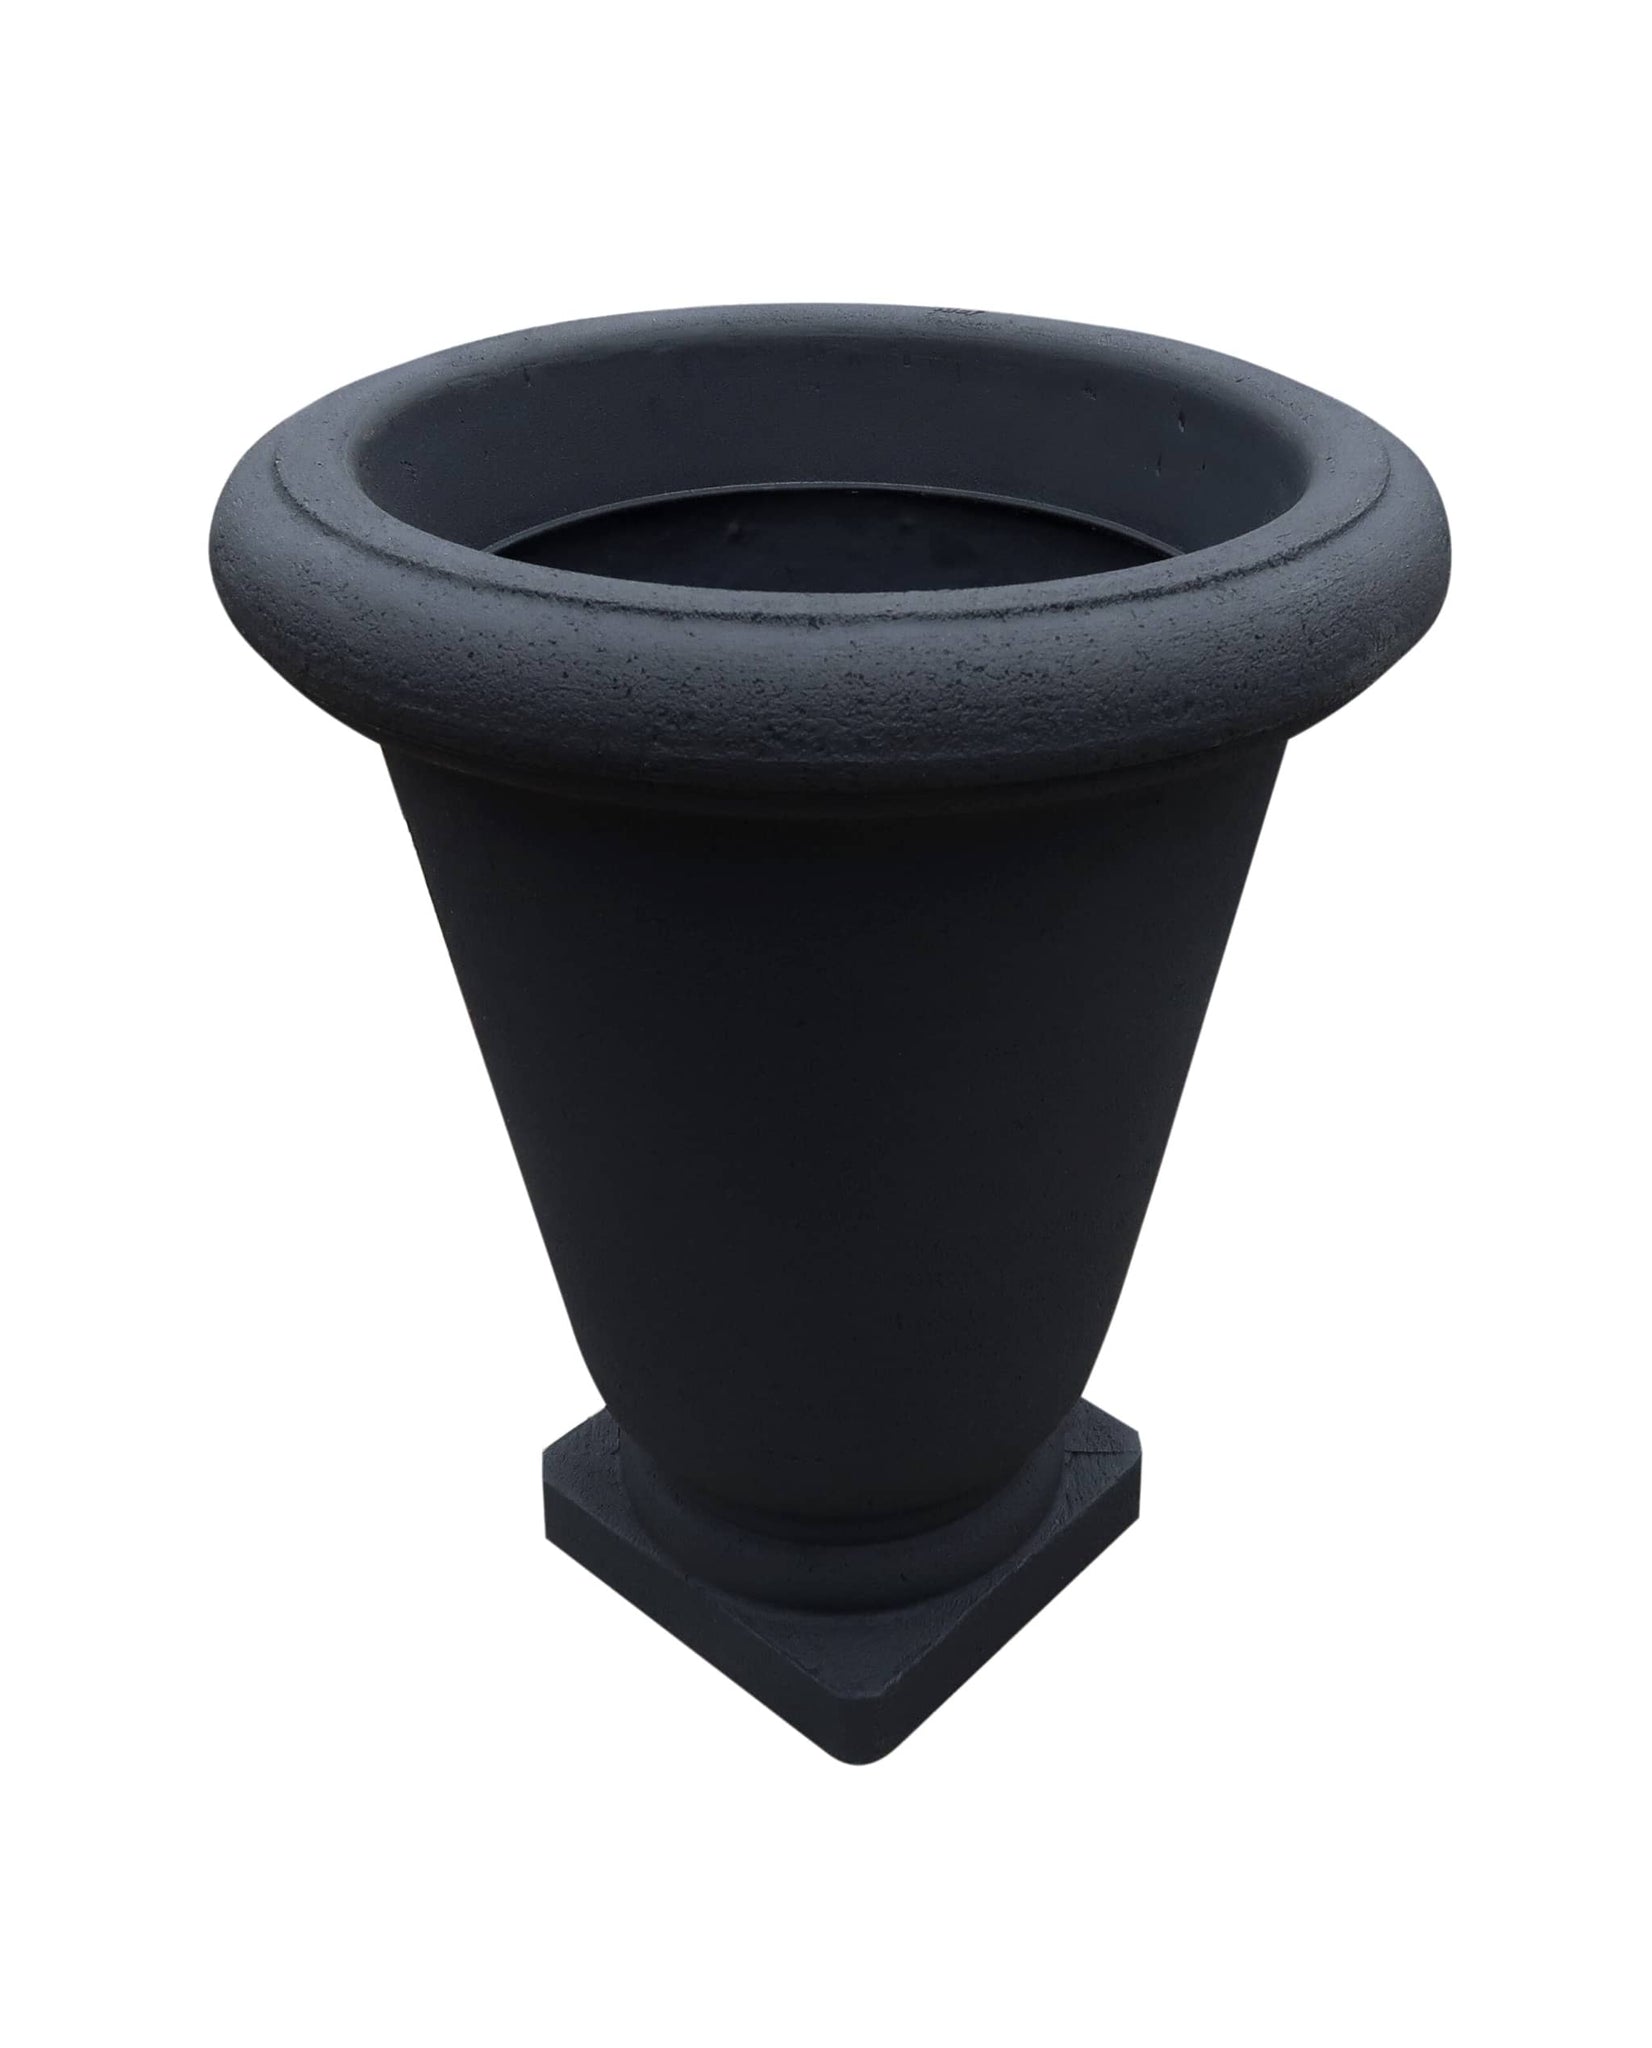 Bell Urn Japi Planter in colour Lead (black). Angled view showing inside lip